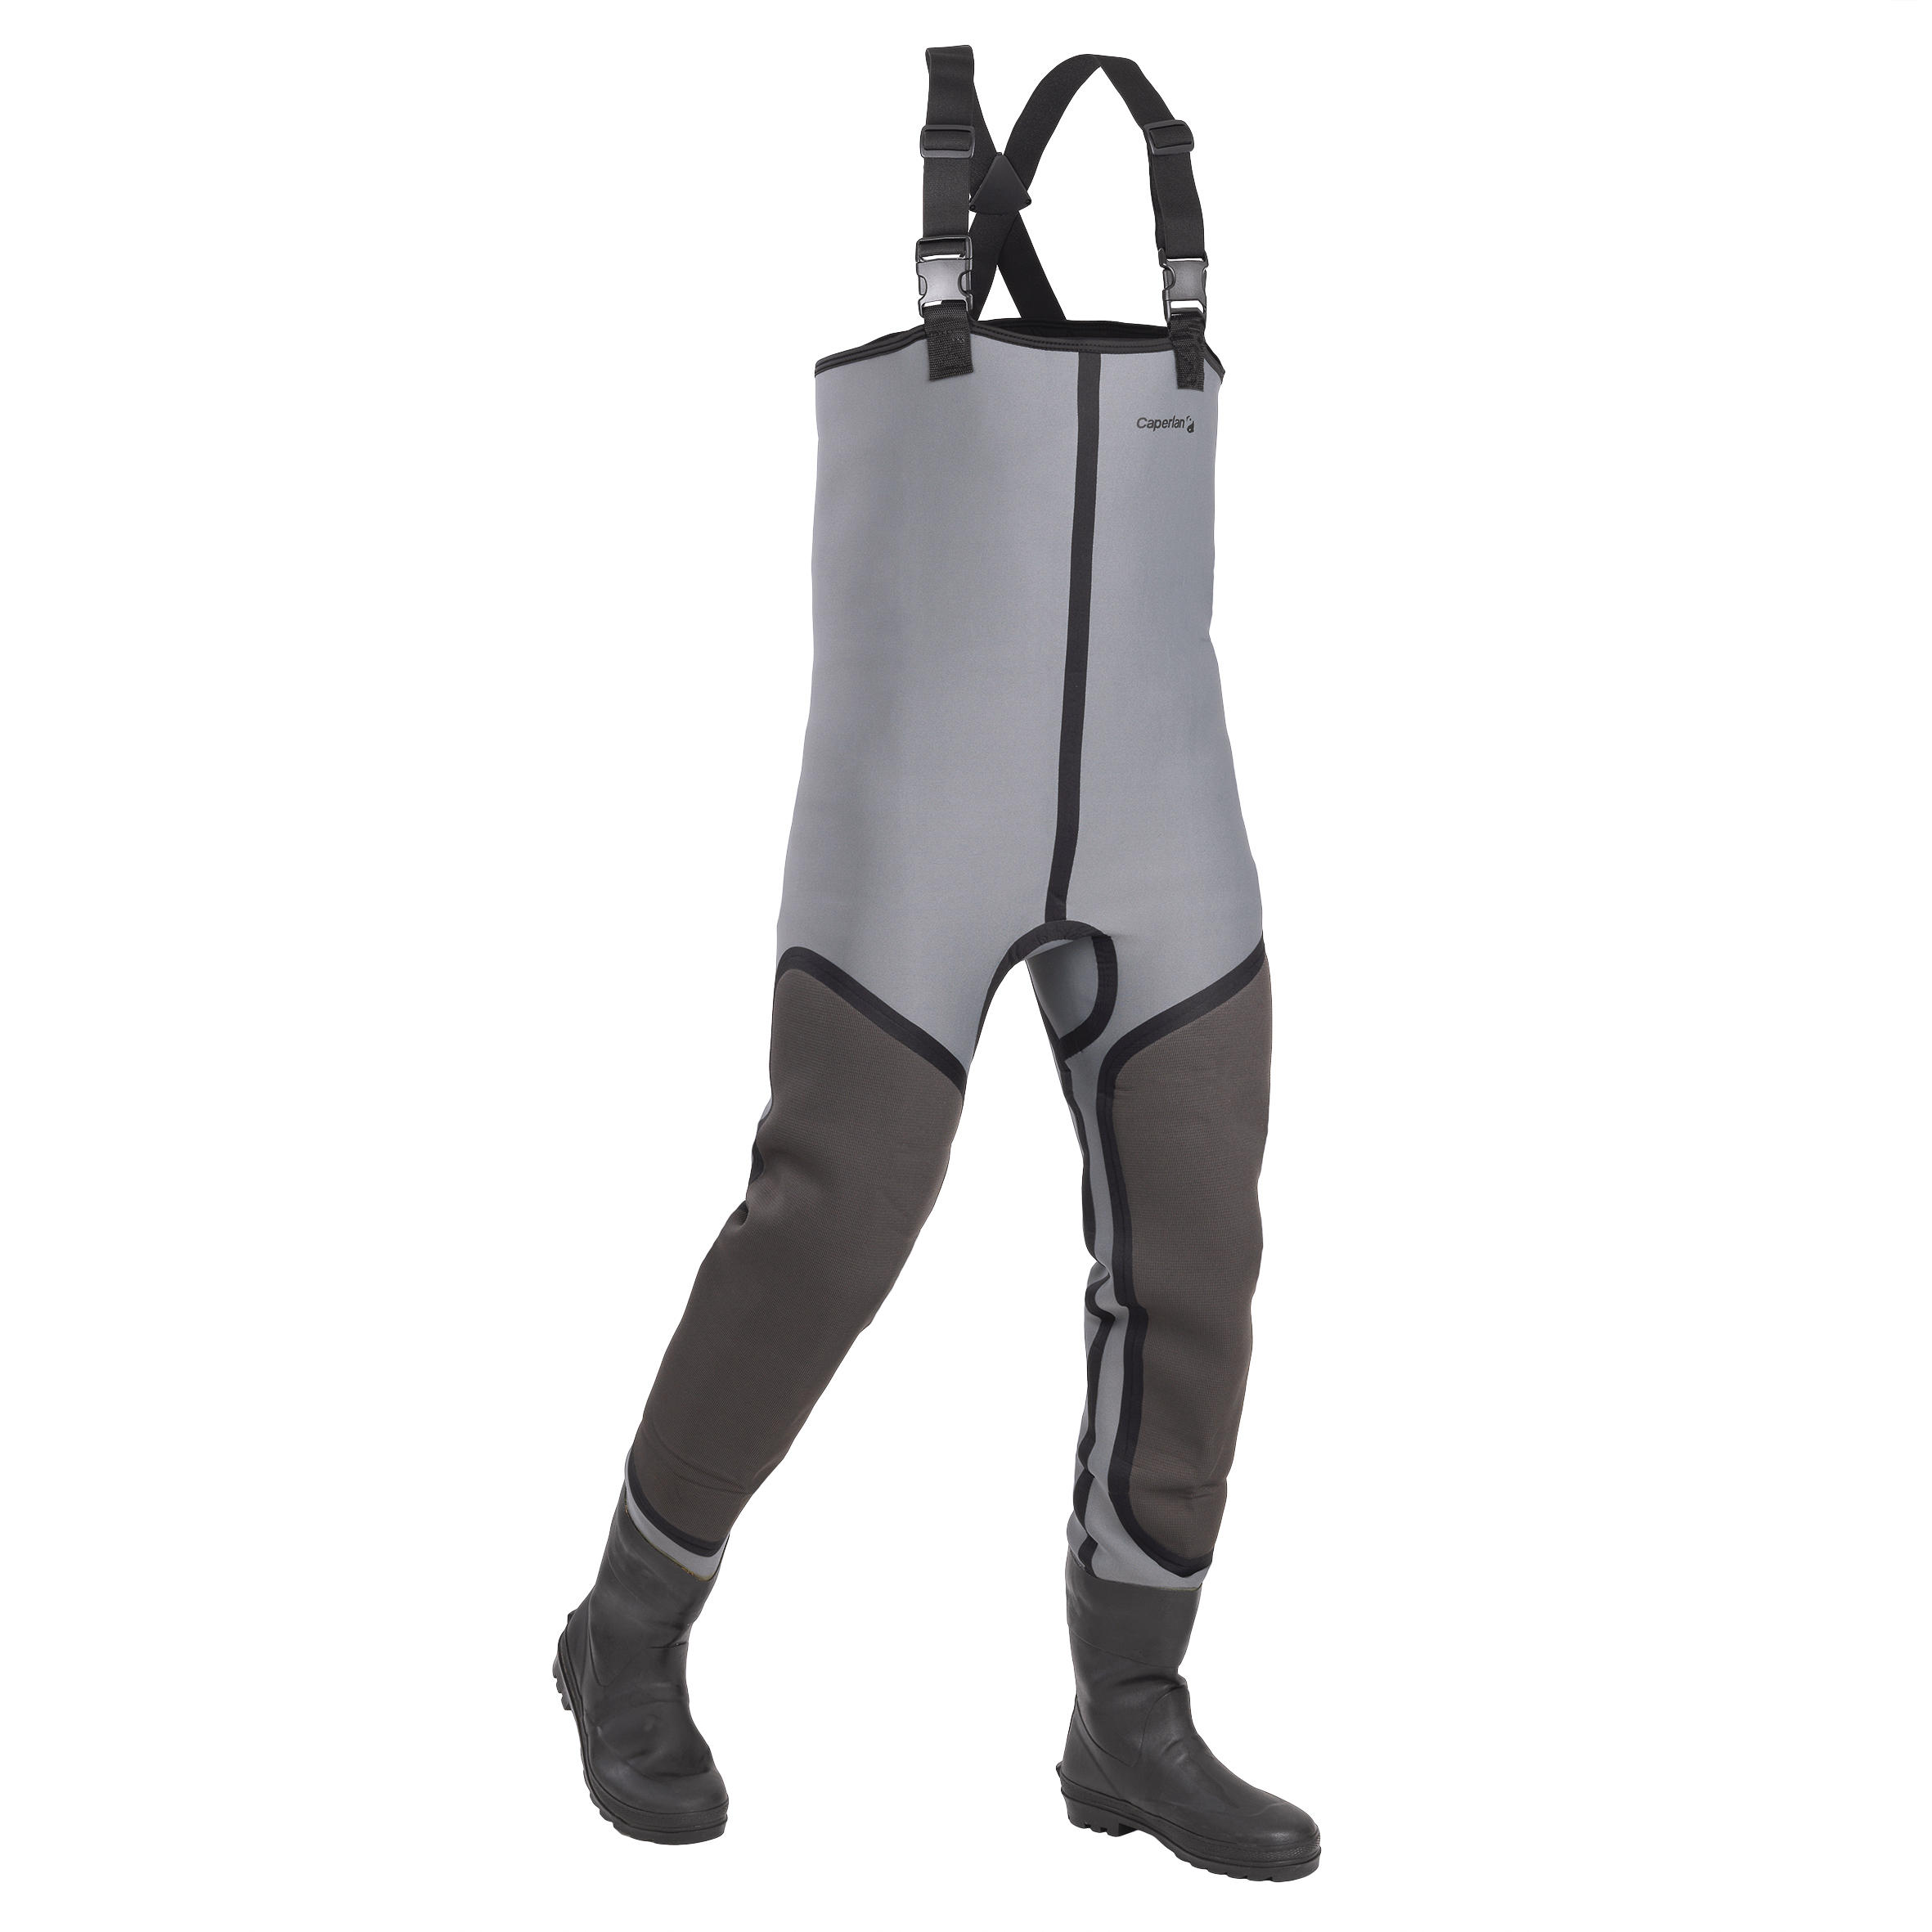 Waders Thermo Pescuit WDS-3 CAPERLAN imagine noua